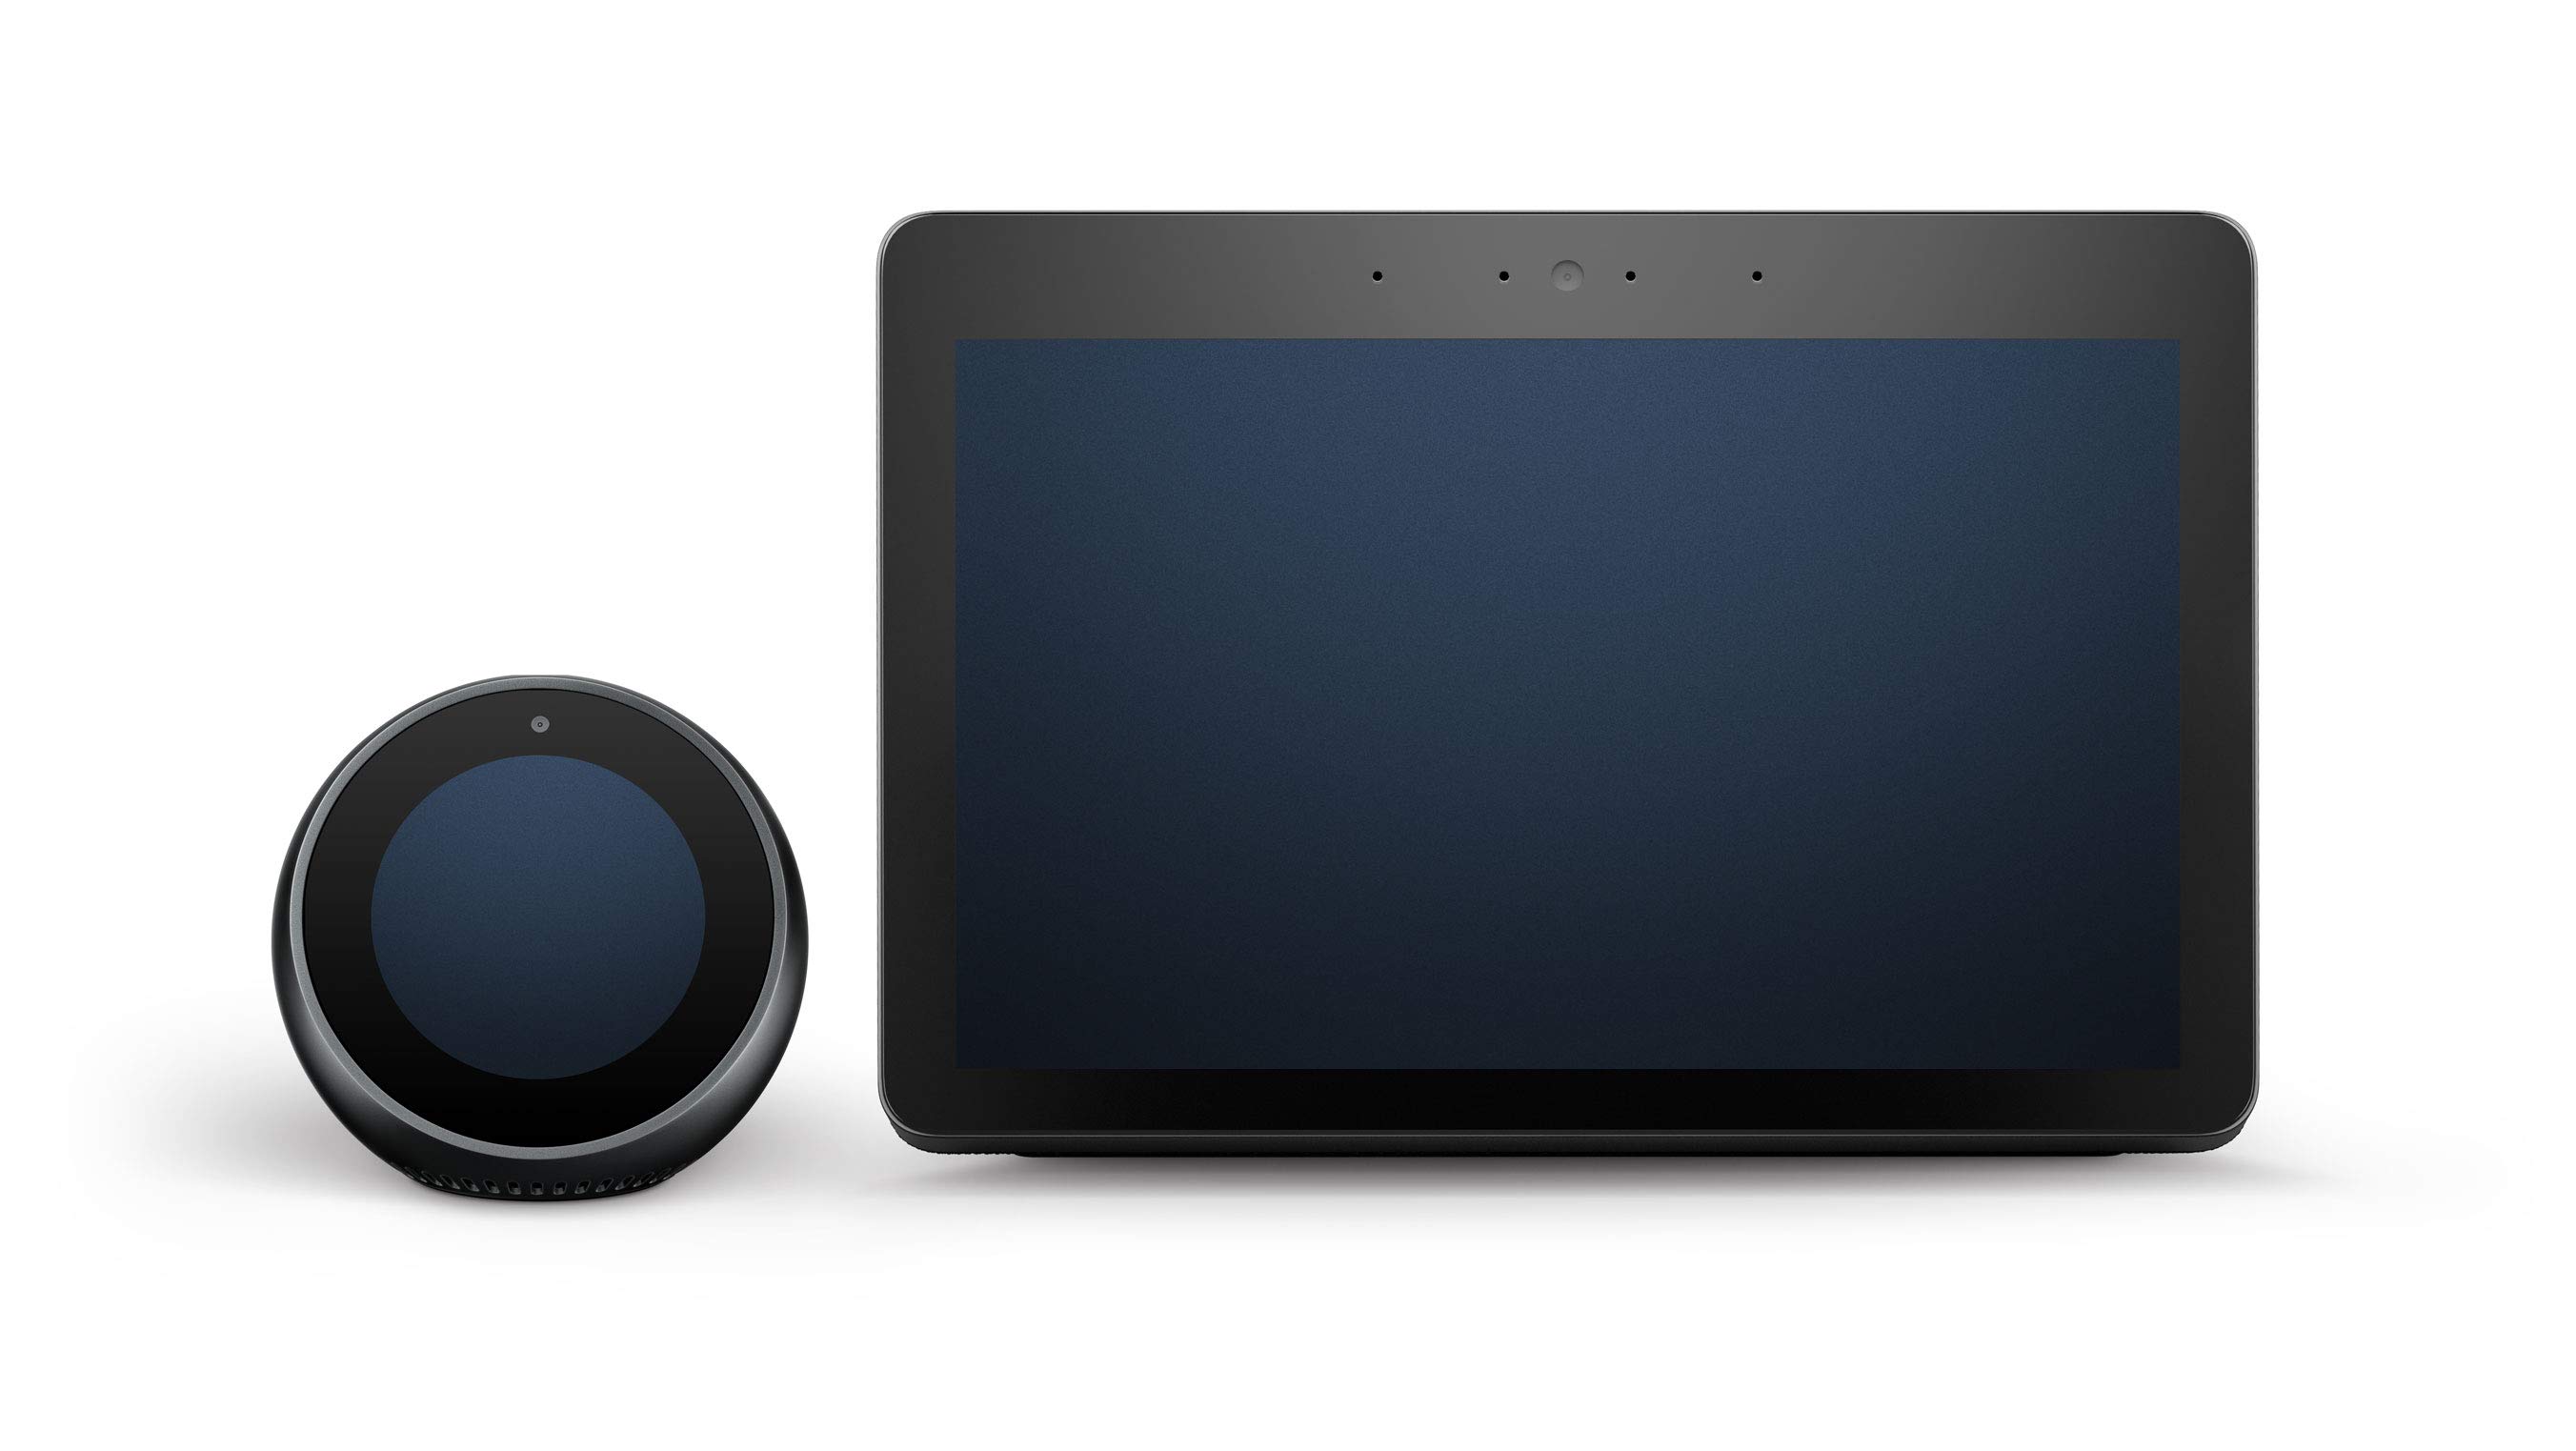 An Example Of Two Hub Devices Showing The Default Background - Tablet Computer - HD Wallpaper 